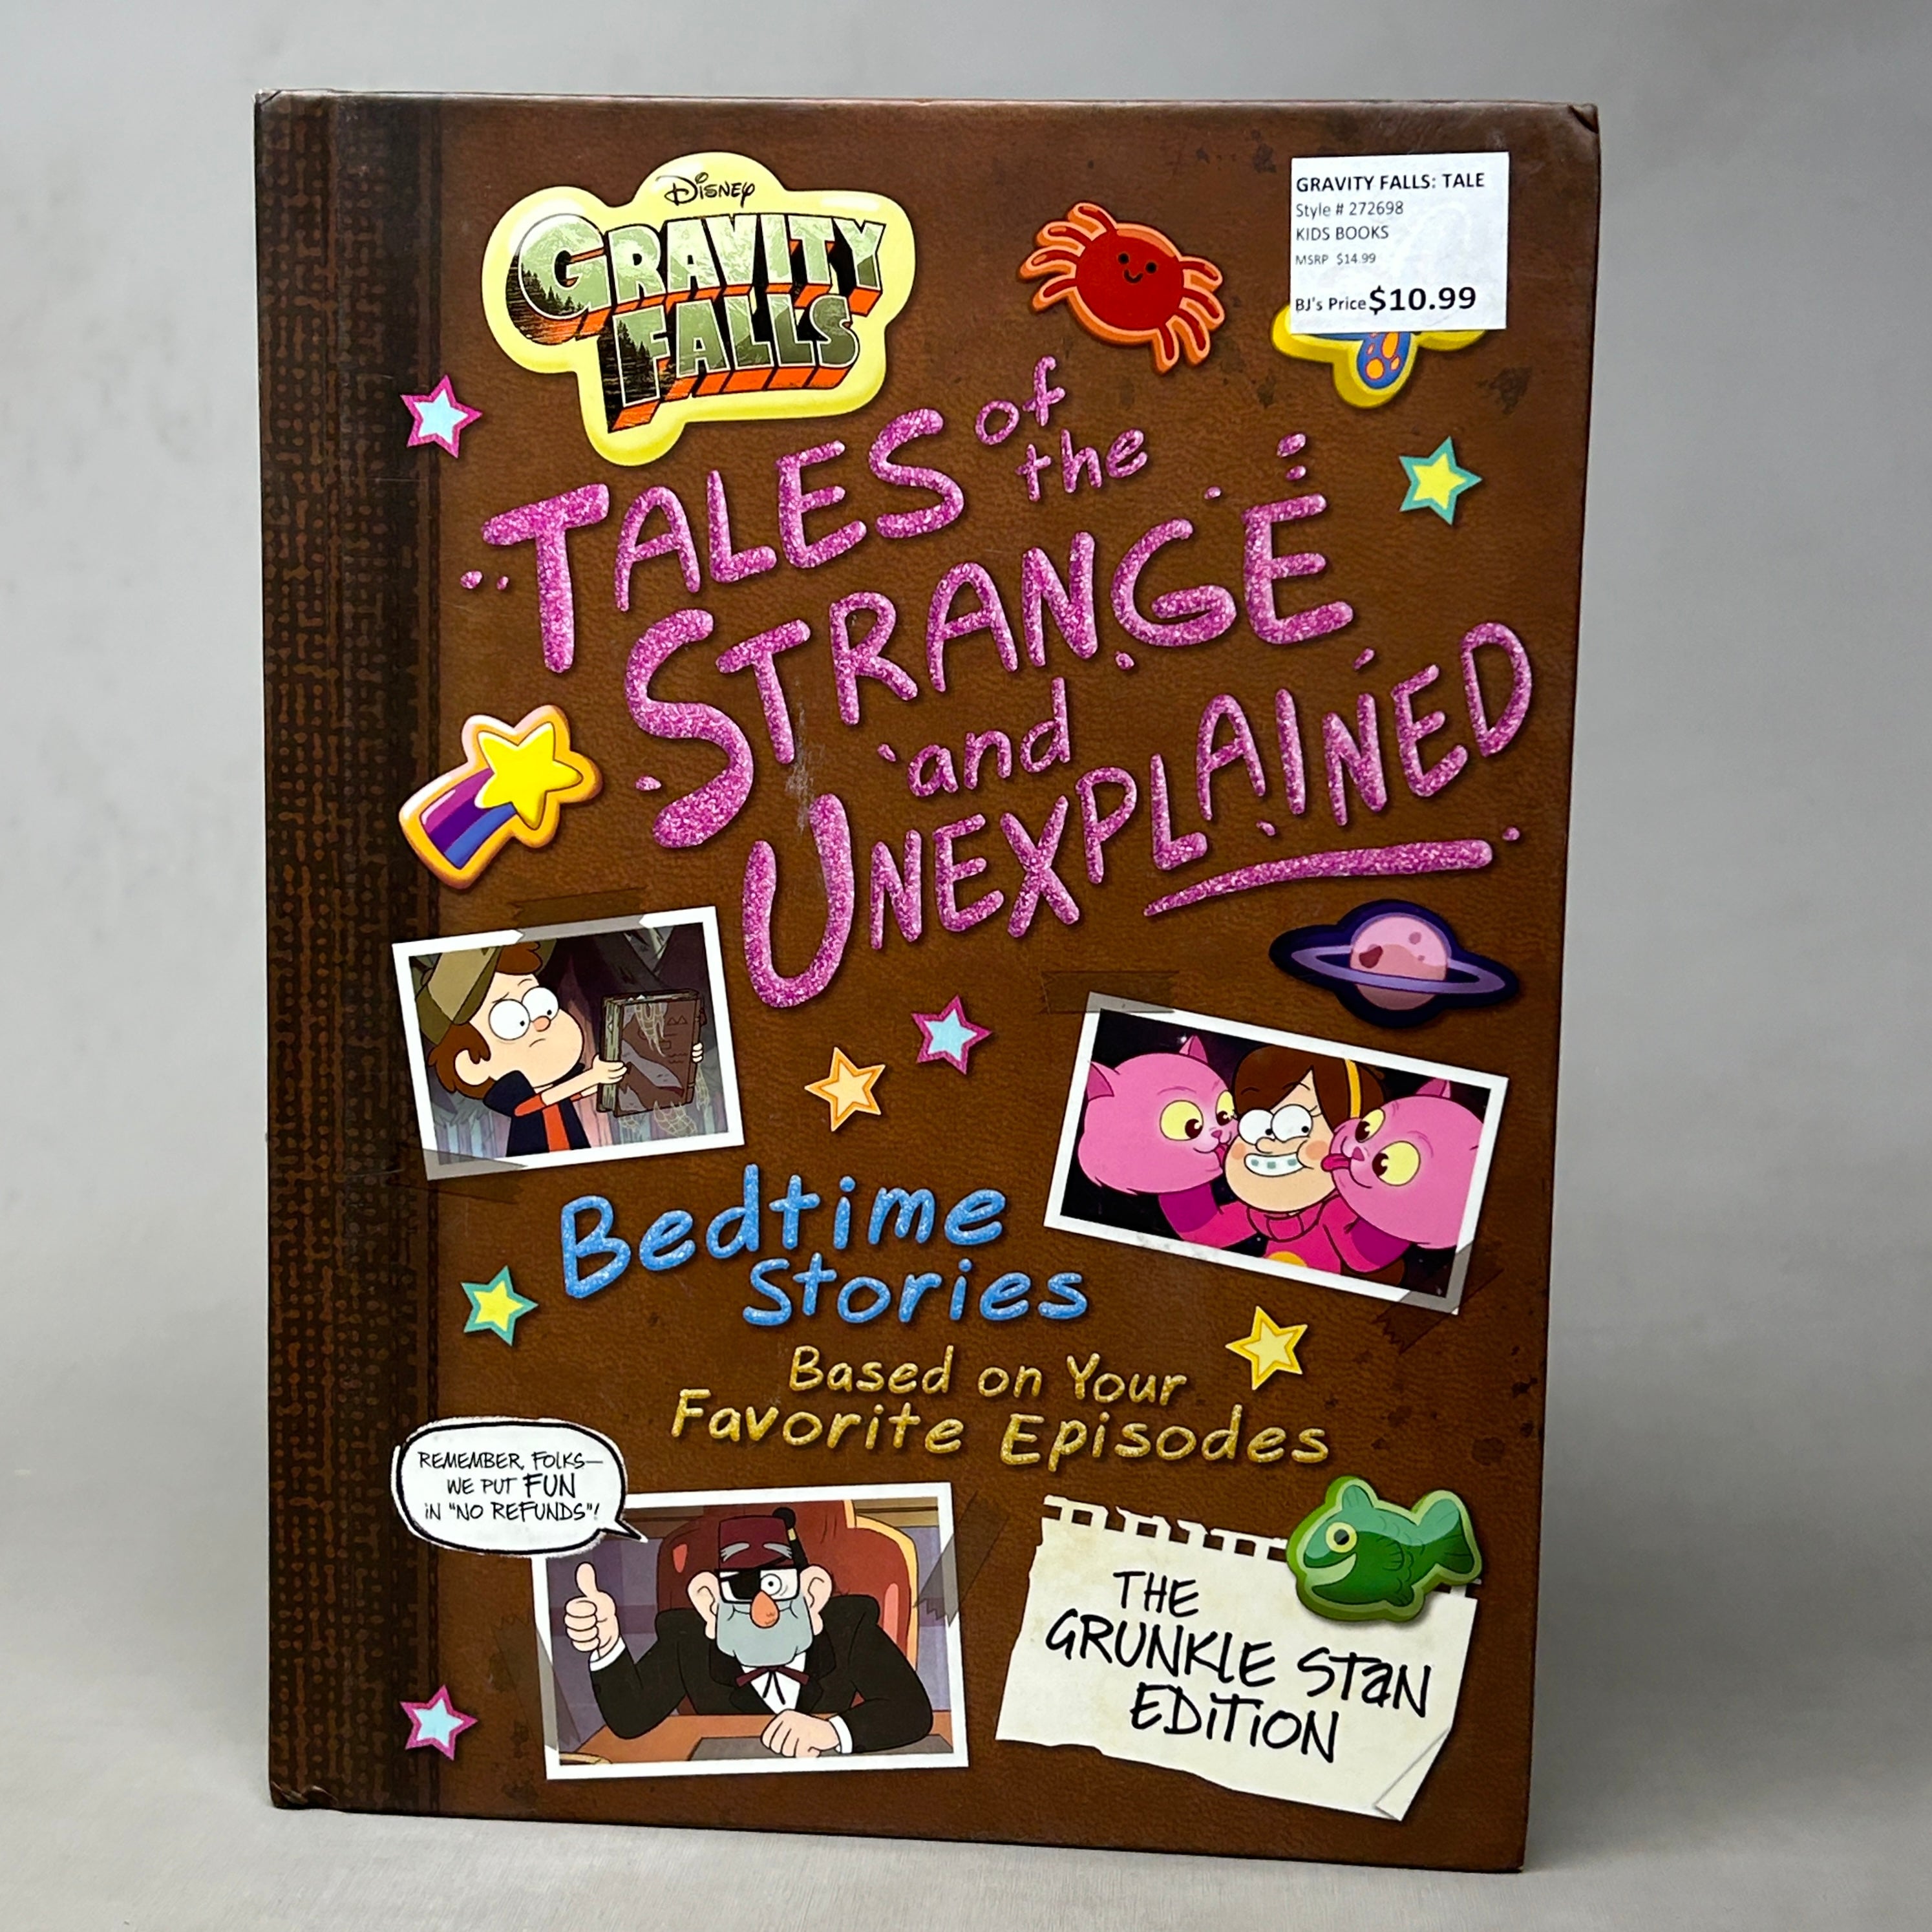 Gravity Falls: Tales of the Strange and Unexplained (Bedtime Stories Based  on Your Favorite Episodes!) by Disney Books Disney Storybook Art Team -  Disney, Disney Channel, Gravity Falls Books